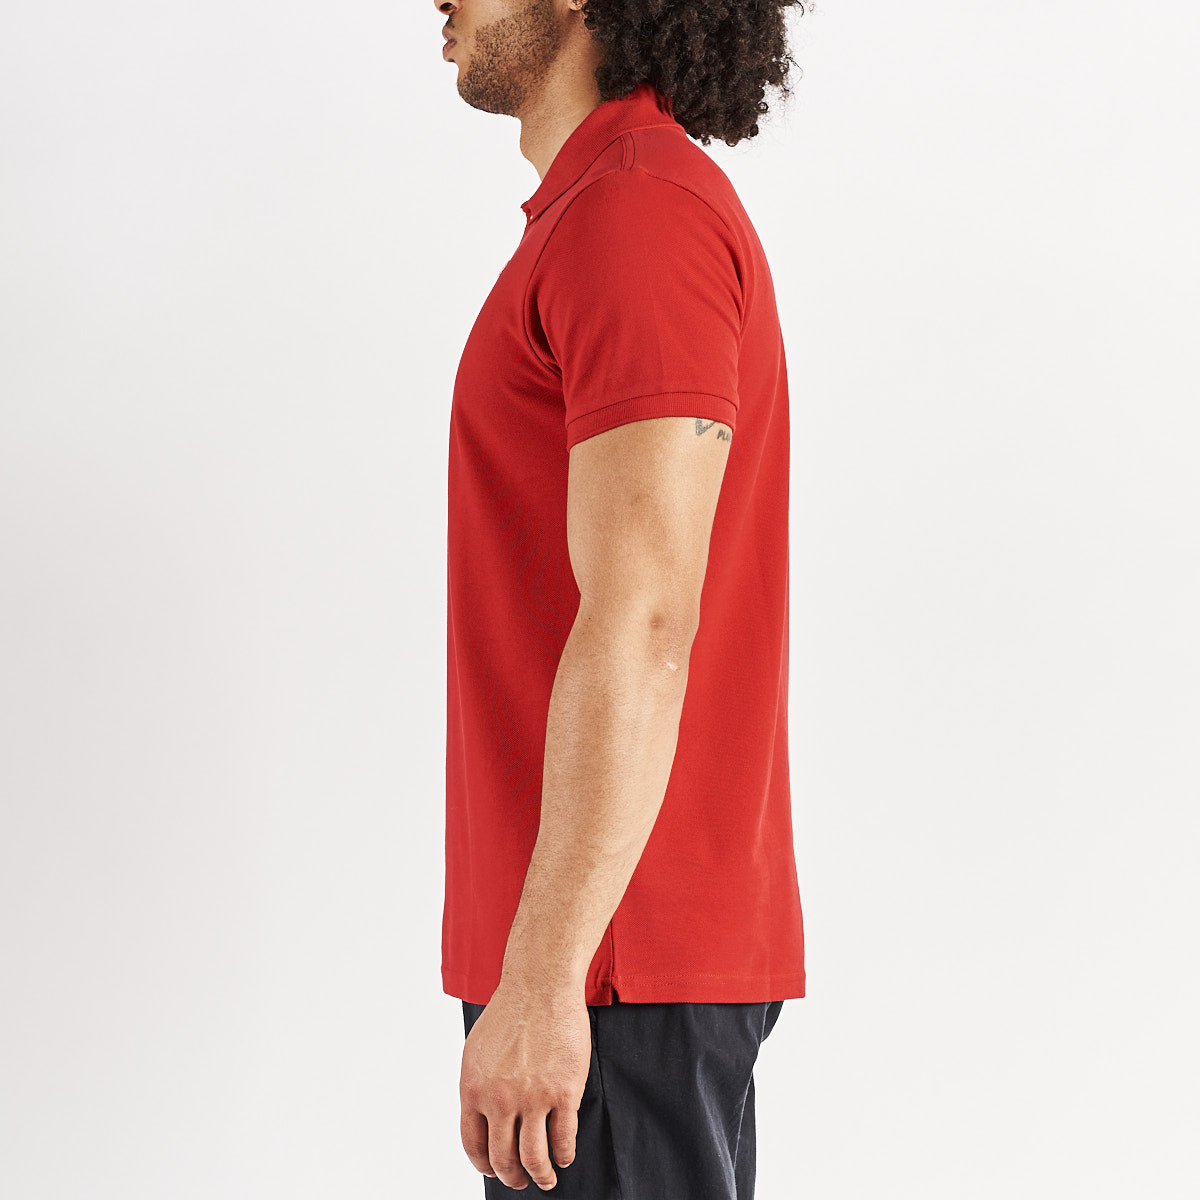 Polo William Robe di Kappa Rouge Homme - Image 2